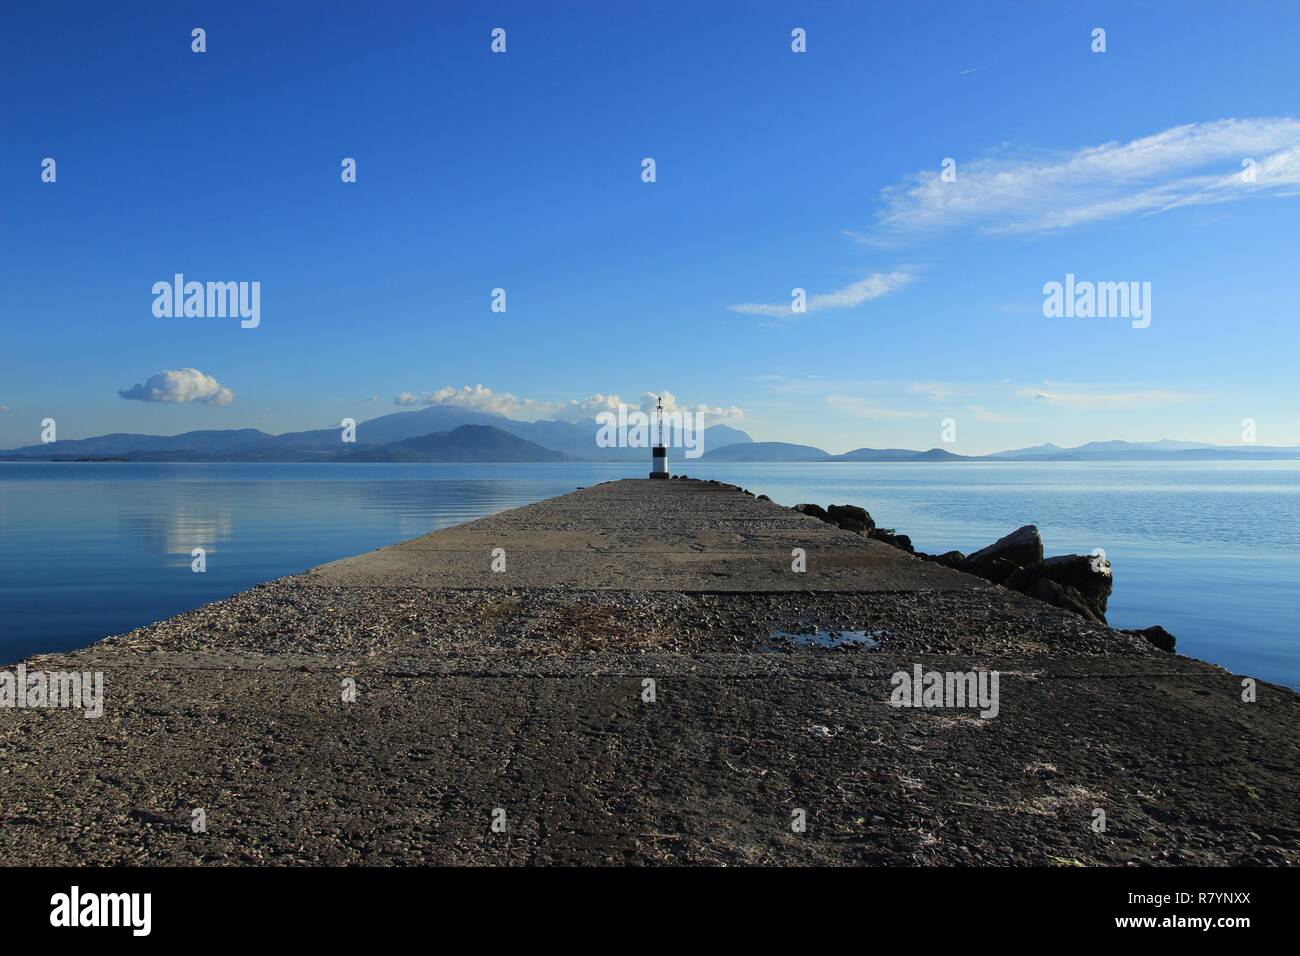 Beacon at the end of pier at Koronisia village in Ambracian gulf, Epirus Greece, calm blue sea, clouds in the sky Stock Photo